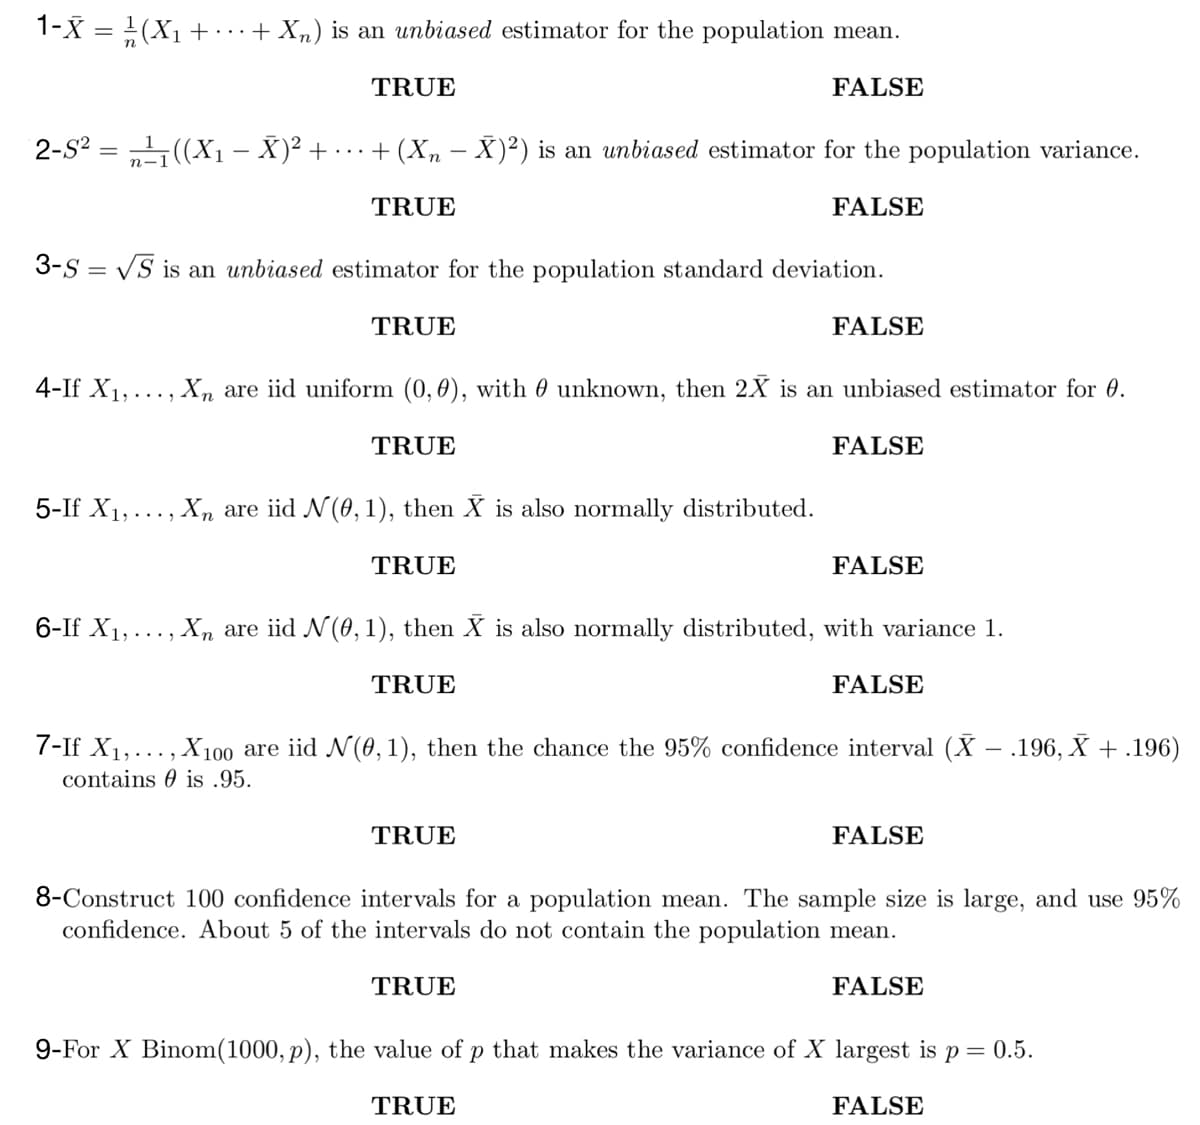 1-X = ¹/2 (X₁ + · · · + Xn) is an unbiased estimator for the population mean.
FALSE
2-S² = ¹₁((X₁ - Ă)² +
TRUE
+ (Xn - X)²) is an unbiased estimator for the population variance.
TRUE
FALSE
3-S = √S is an unbiased estimator for the population standard deviation.
6-If X₁,
TRUE
4-If X₁,..., Xn are iid uniform (0, 0), with unknown, then 2X is an unbiased estimator for 0.
TRUE
FALSE
5-If X₁,. ‚ Xñ are iid N (0, 1), then X is also normally distributed.
TRUE
FALSE
FALSE
‚‚ Xn are iid N (0, 1), then X is also normally distributed, with variance 1.
TRUE
TRUE
FALSE
7-If X₁,..., X100 are iid N(0, 1), then the chance the 95% confidence interval (X - .196, X + .196)
contains is .95.
FALSE
8-Construct 100 confidence intervals for a population mean. The sample size is large, and use 95%
confidence. About 5 of the intervals do not contain the population mean.
TRUE
FALSE
9-For X Binom(1000, p), the value of p that makes the variance of X largest is p = 0.5.
TRUE
FALSE